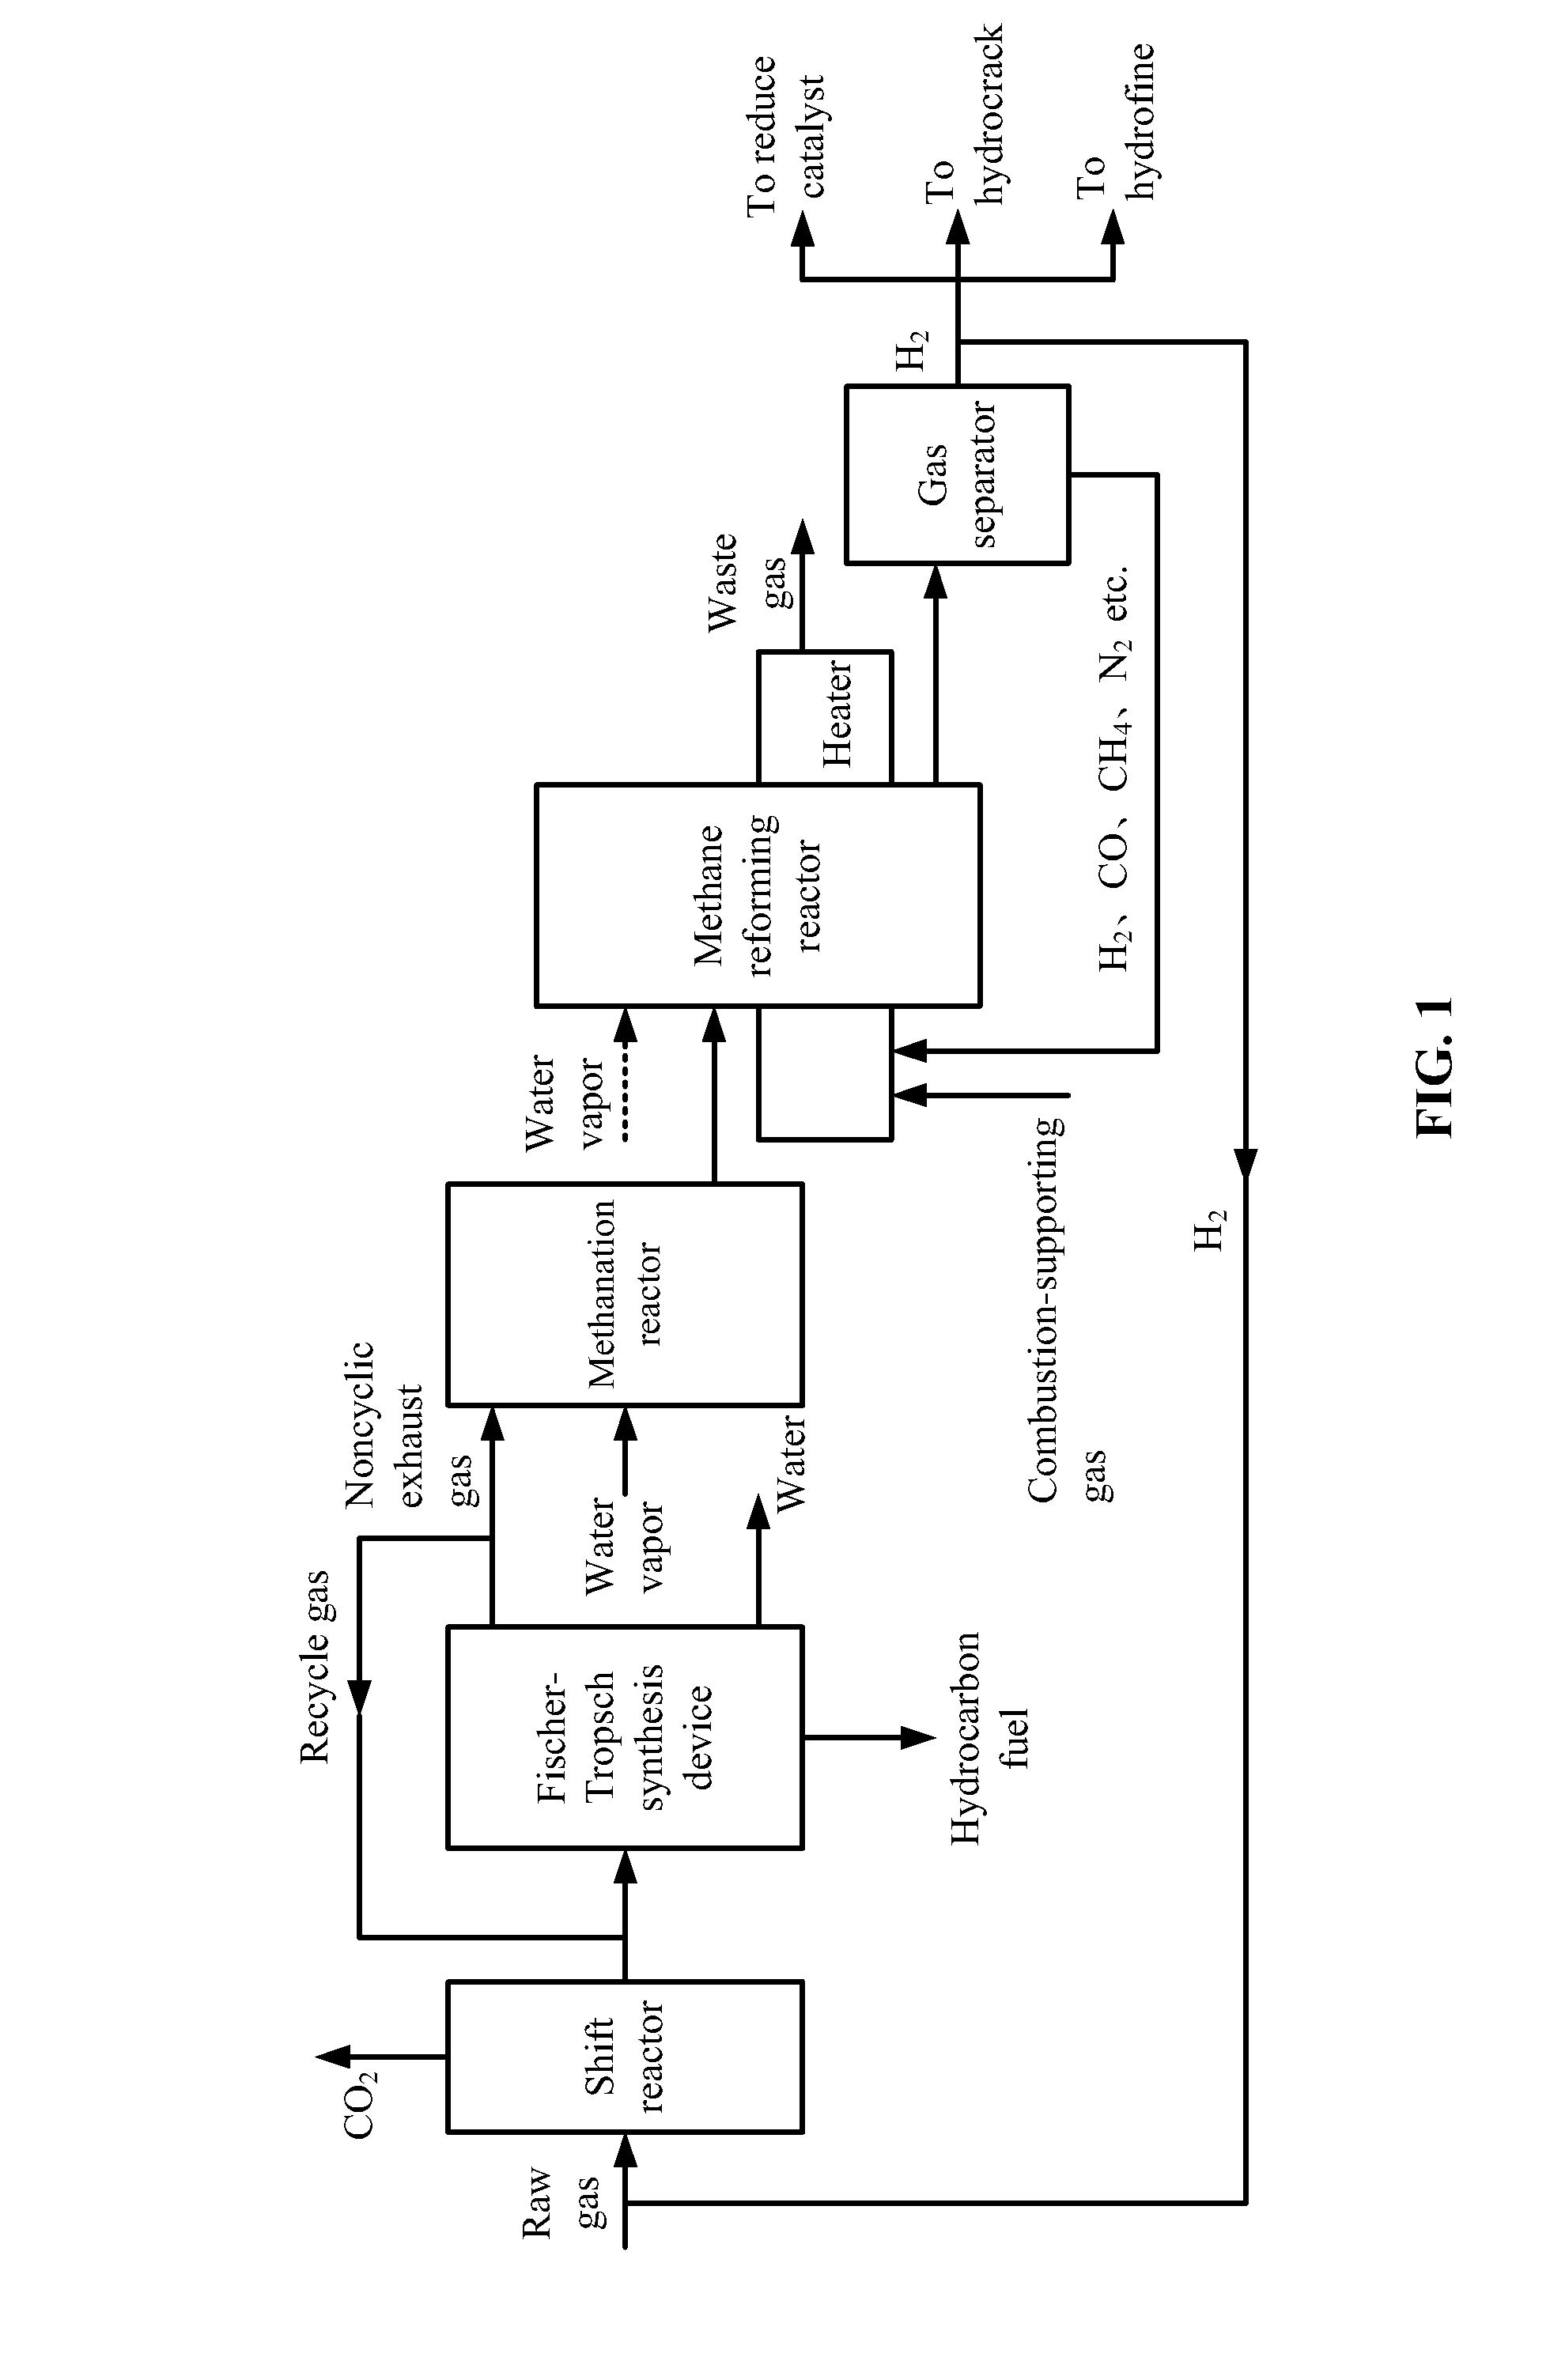 Method for recycling exhaust gases from fischer-tropsch synthesis